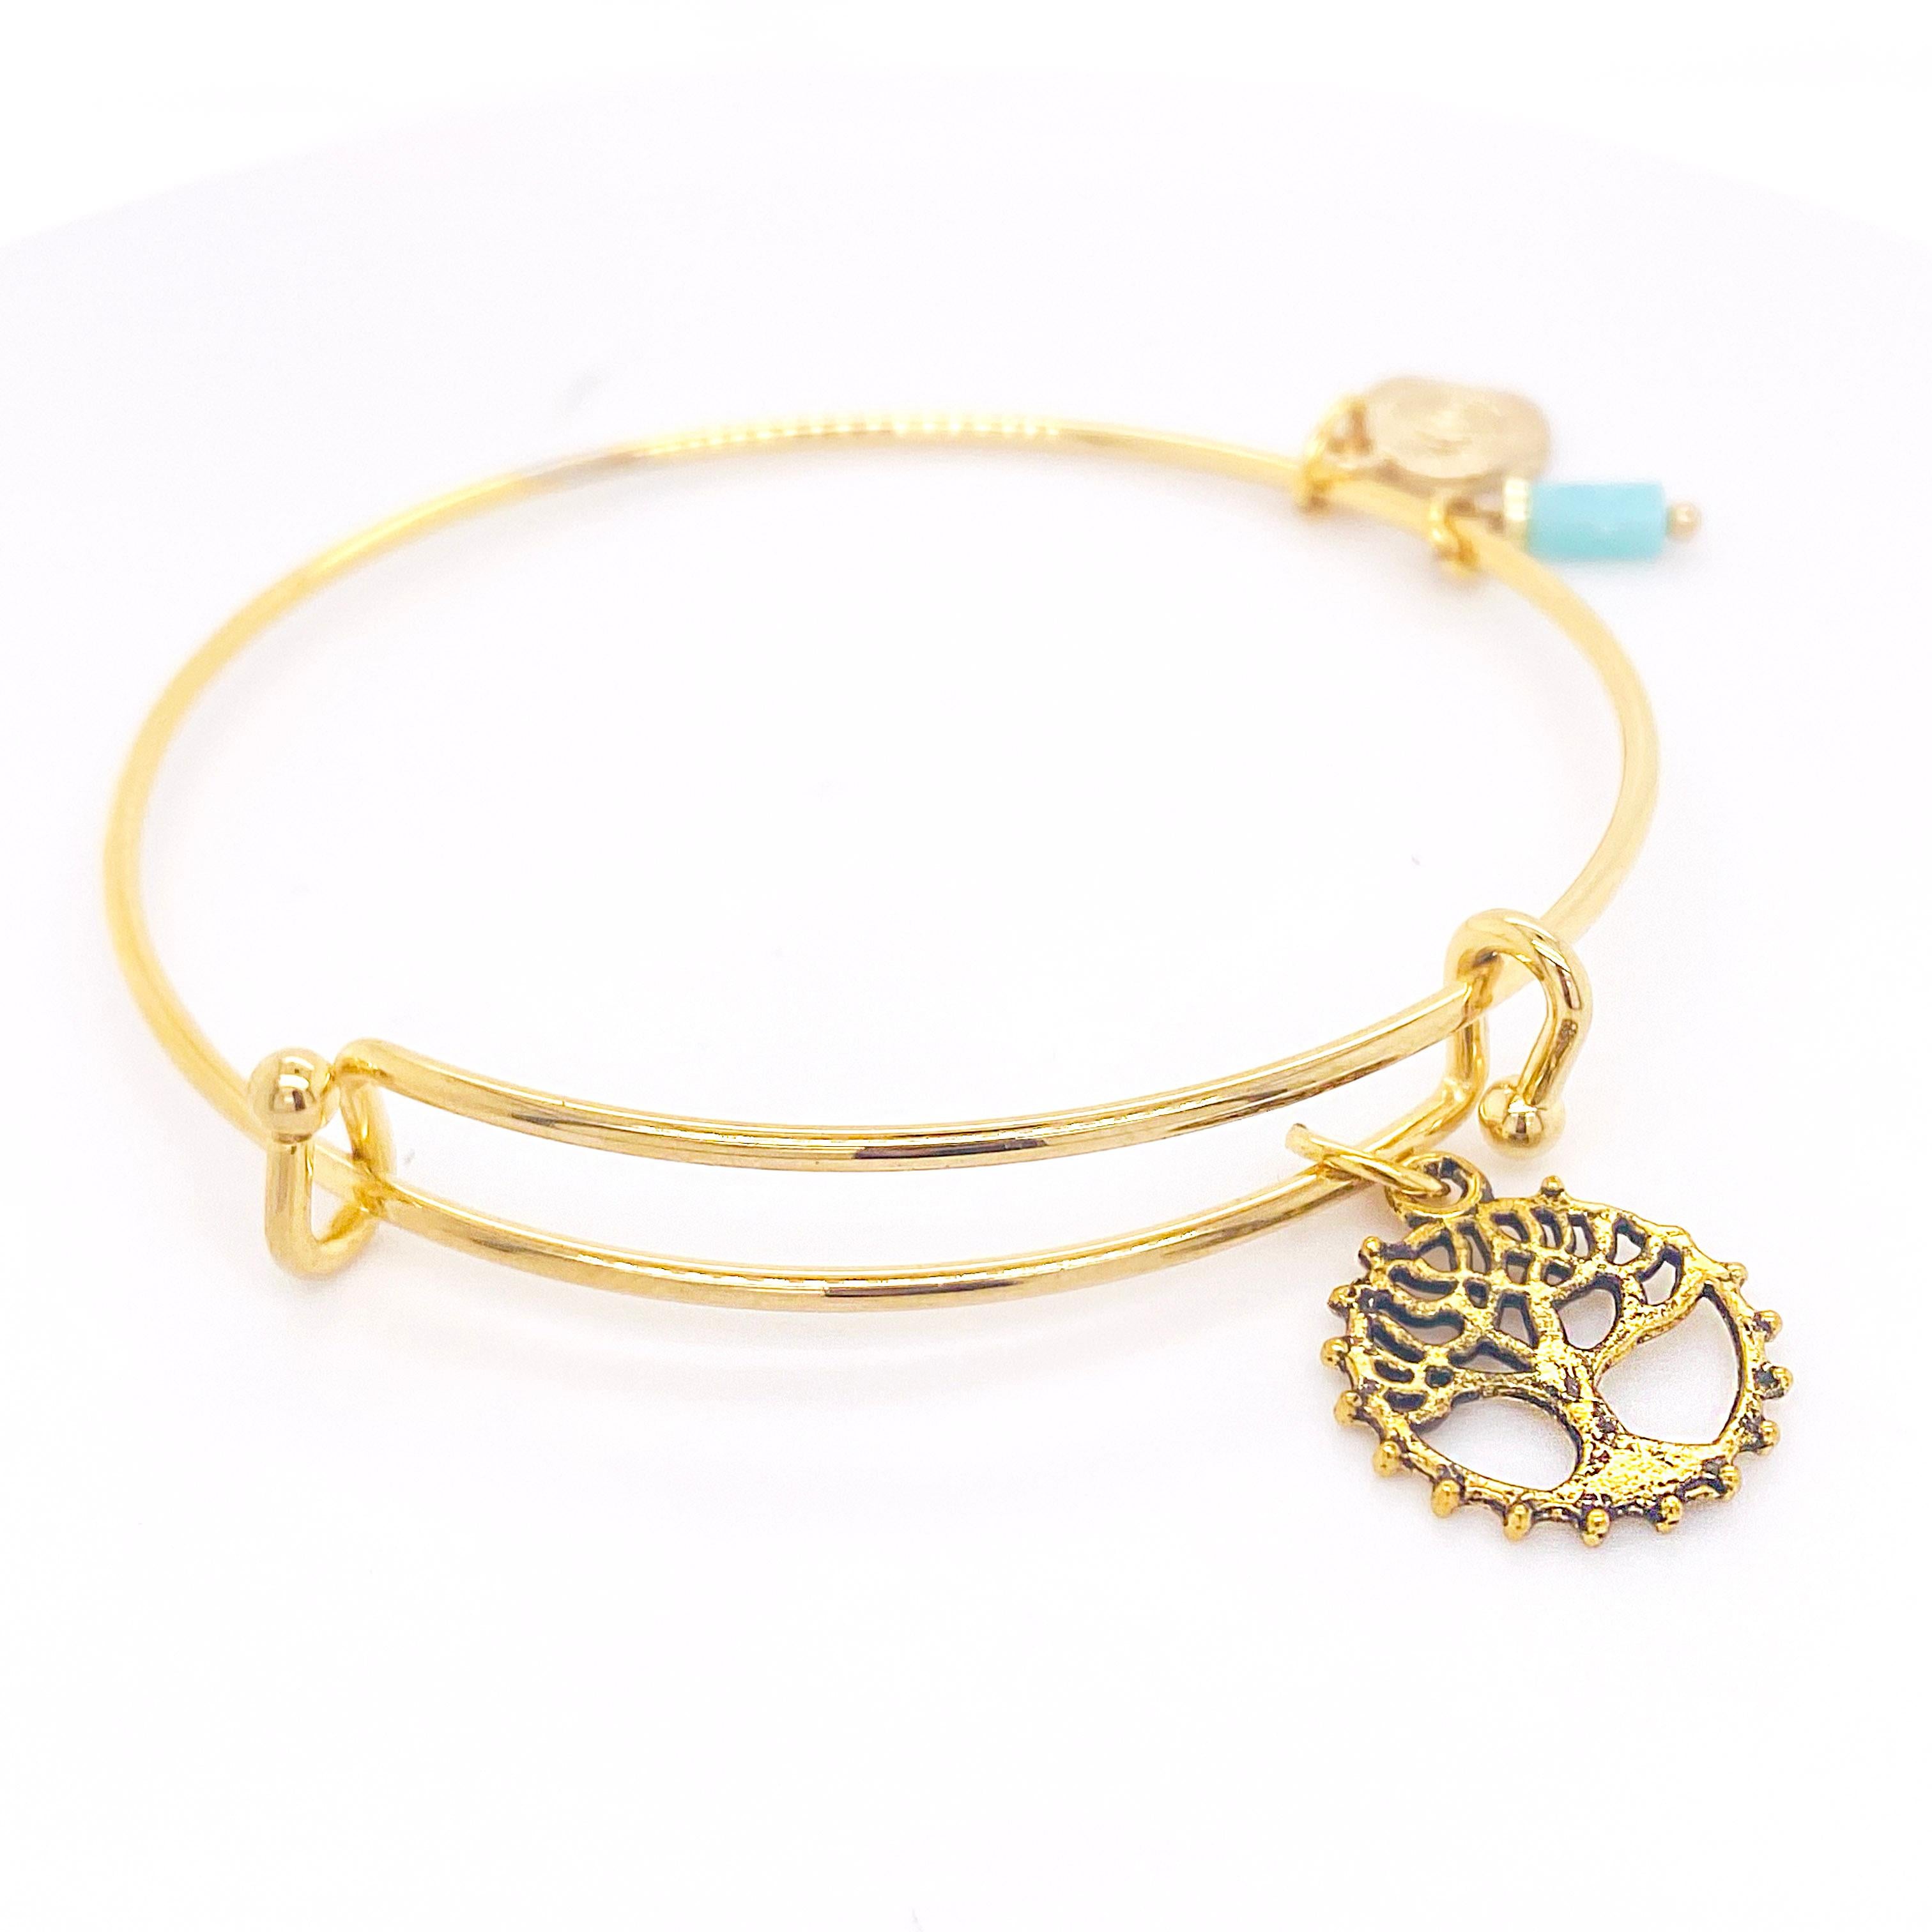 Tree of Life Bracelet representing the family tree! The tree is perfect to represent your family roots.This bracelet is gold overlay. Give this bracelet to everyone in your family or all your friends! The bracelet is adjustable and can fit on most